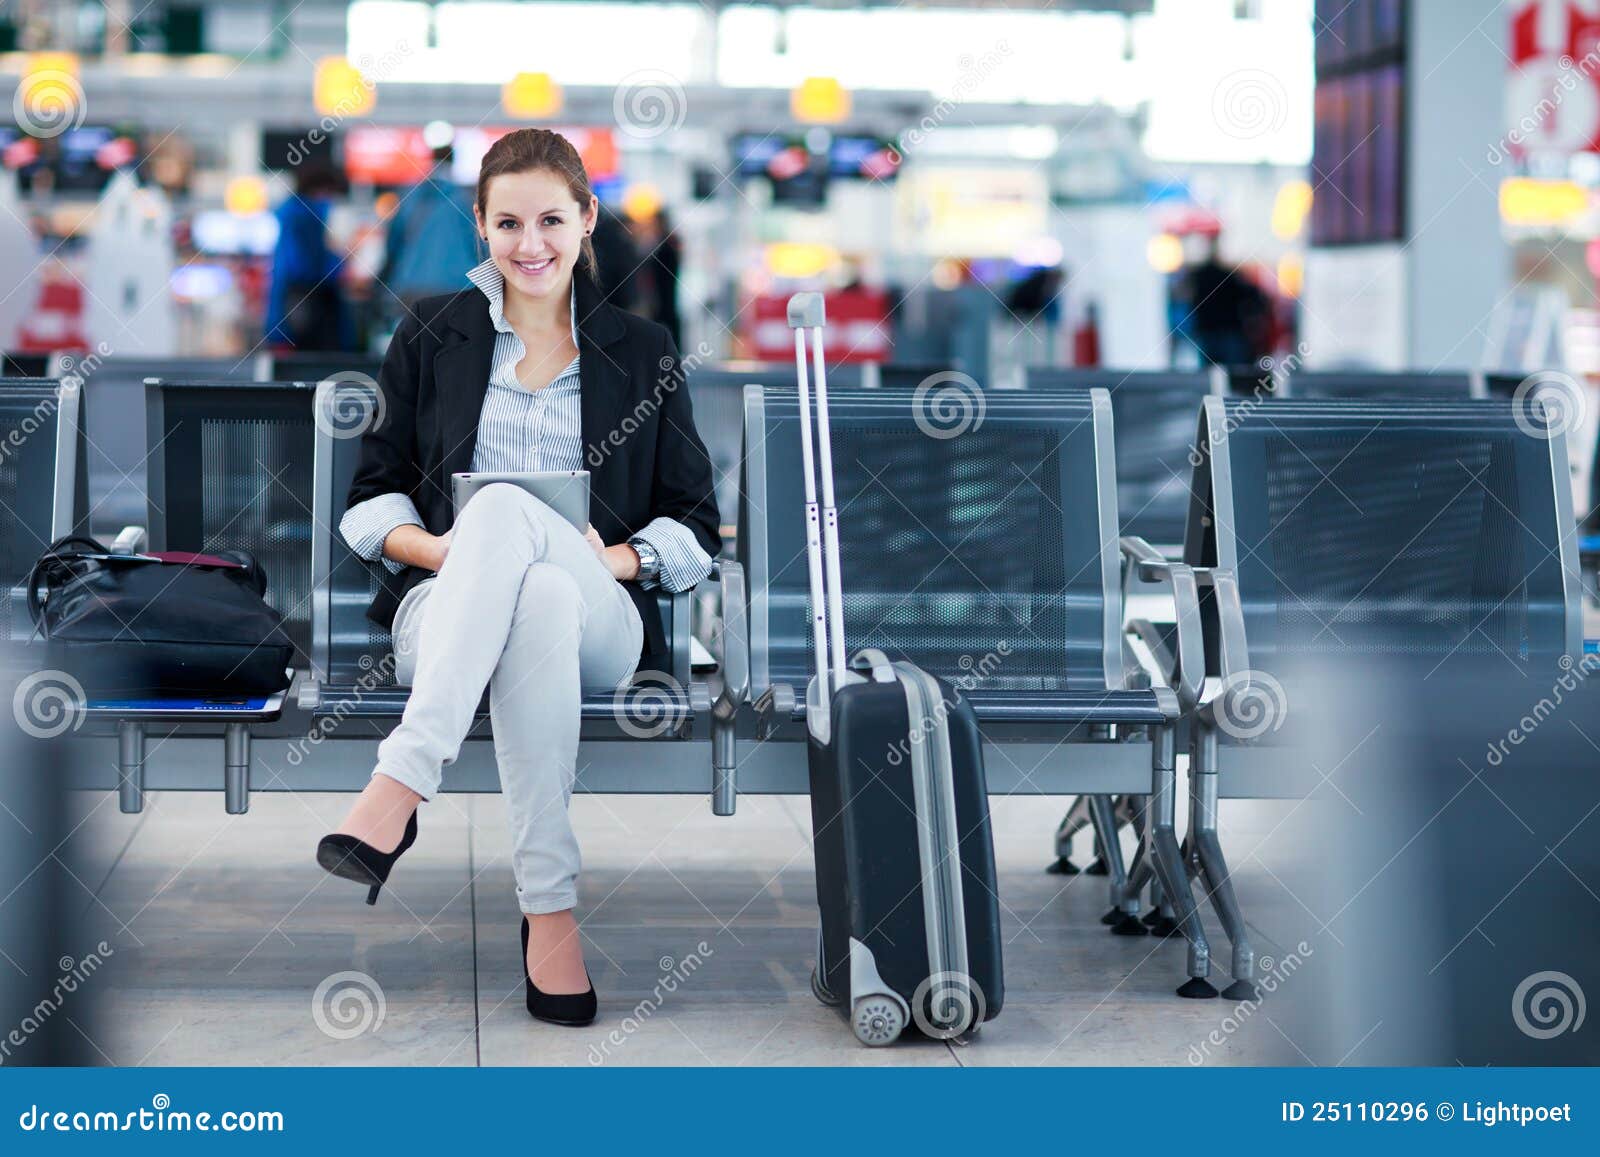 young female passenger at the airport